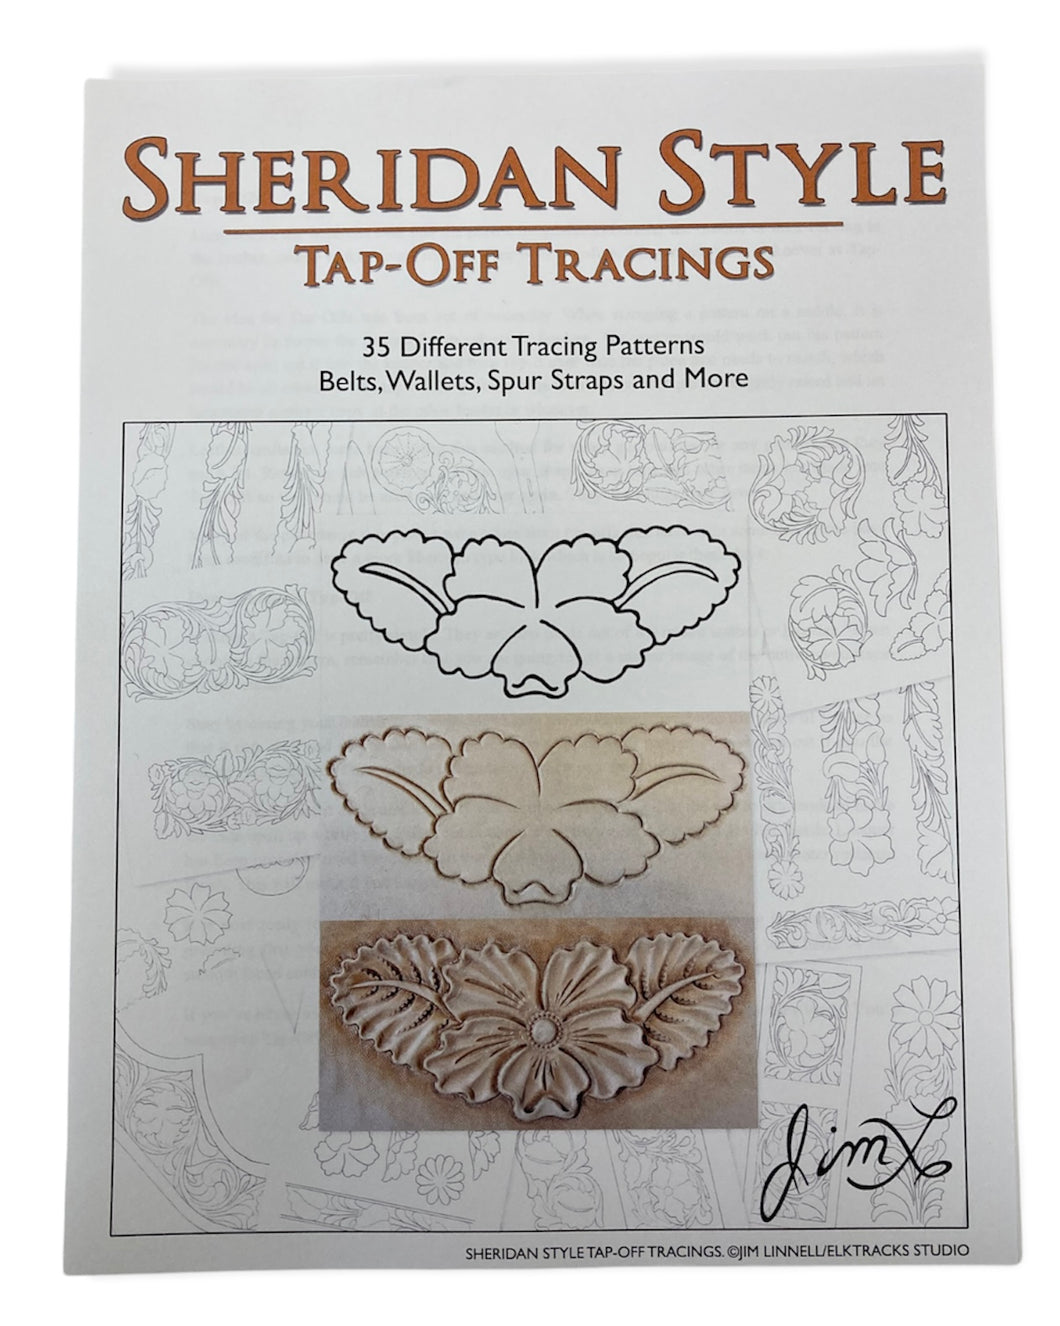 Sheridan Style Tap-Off Tracings